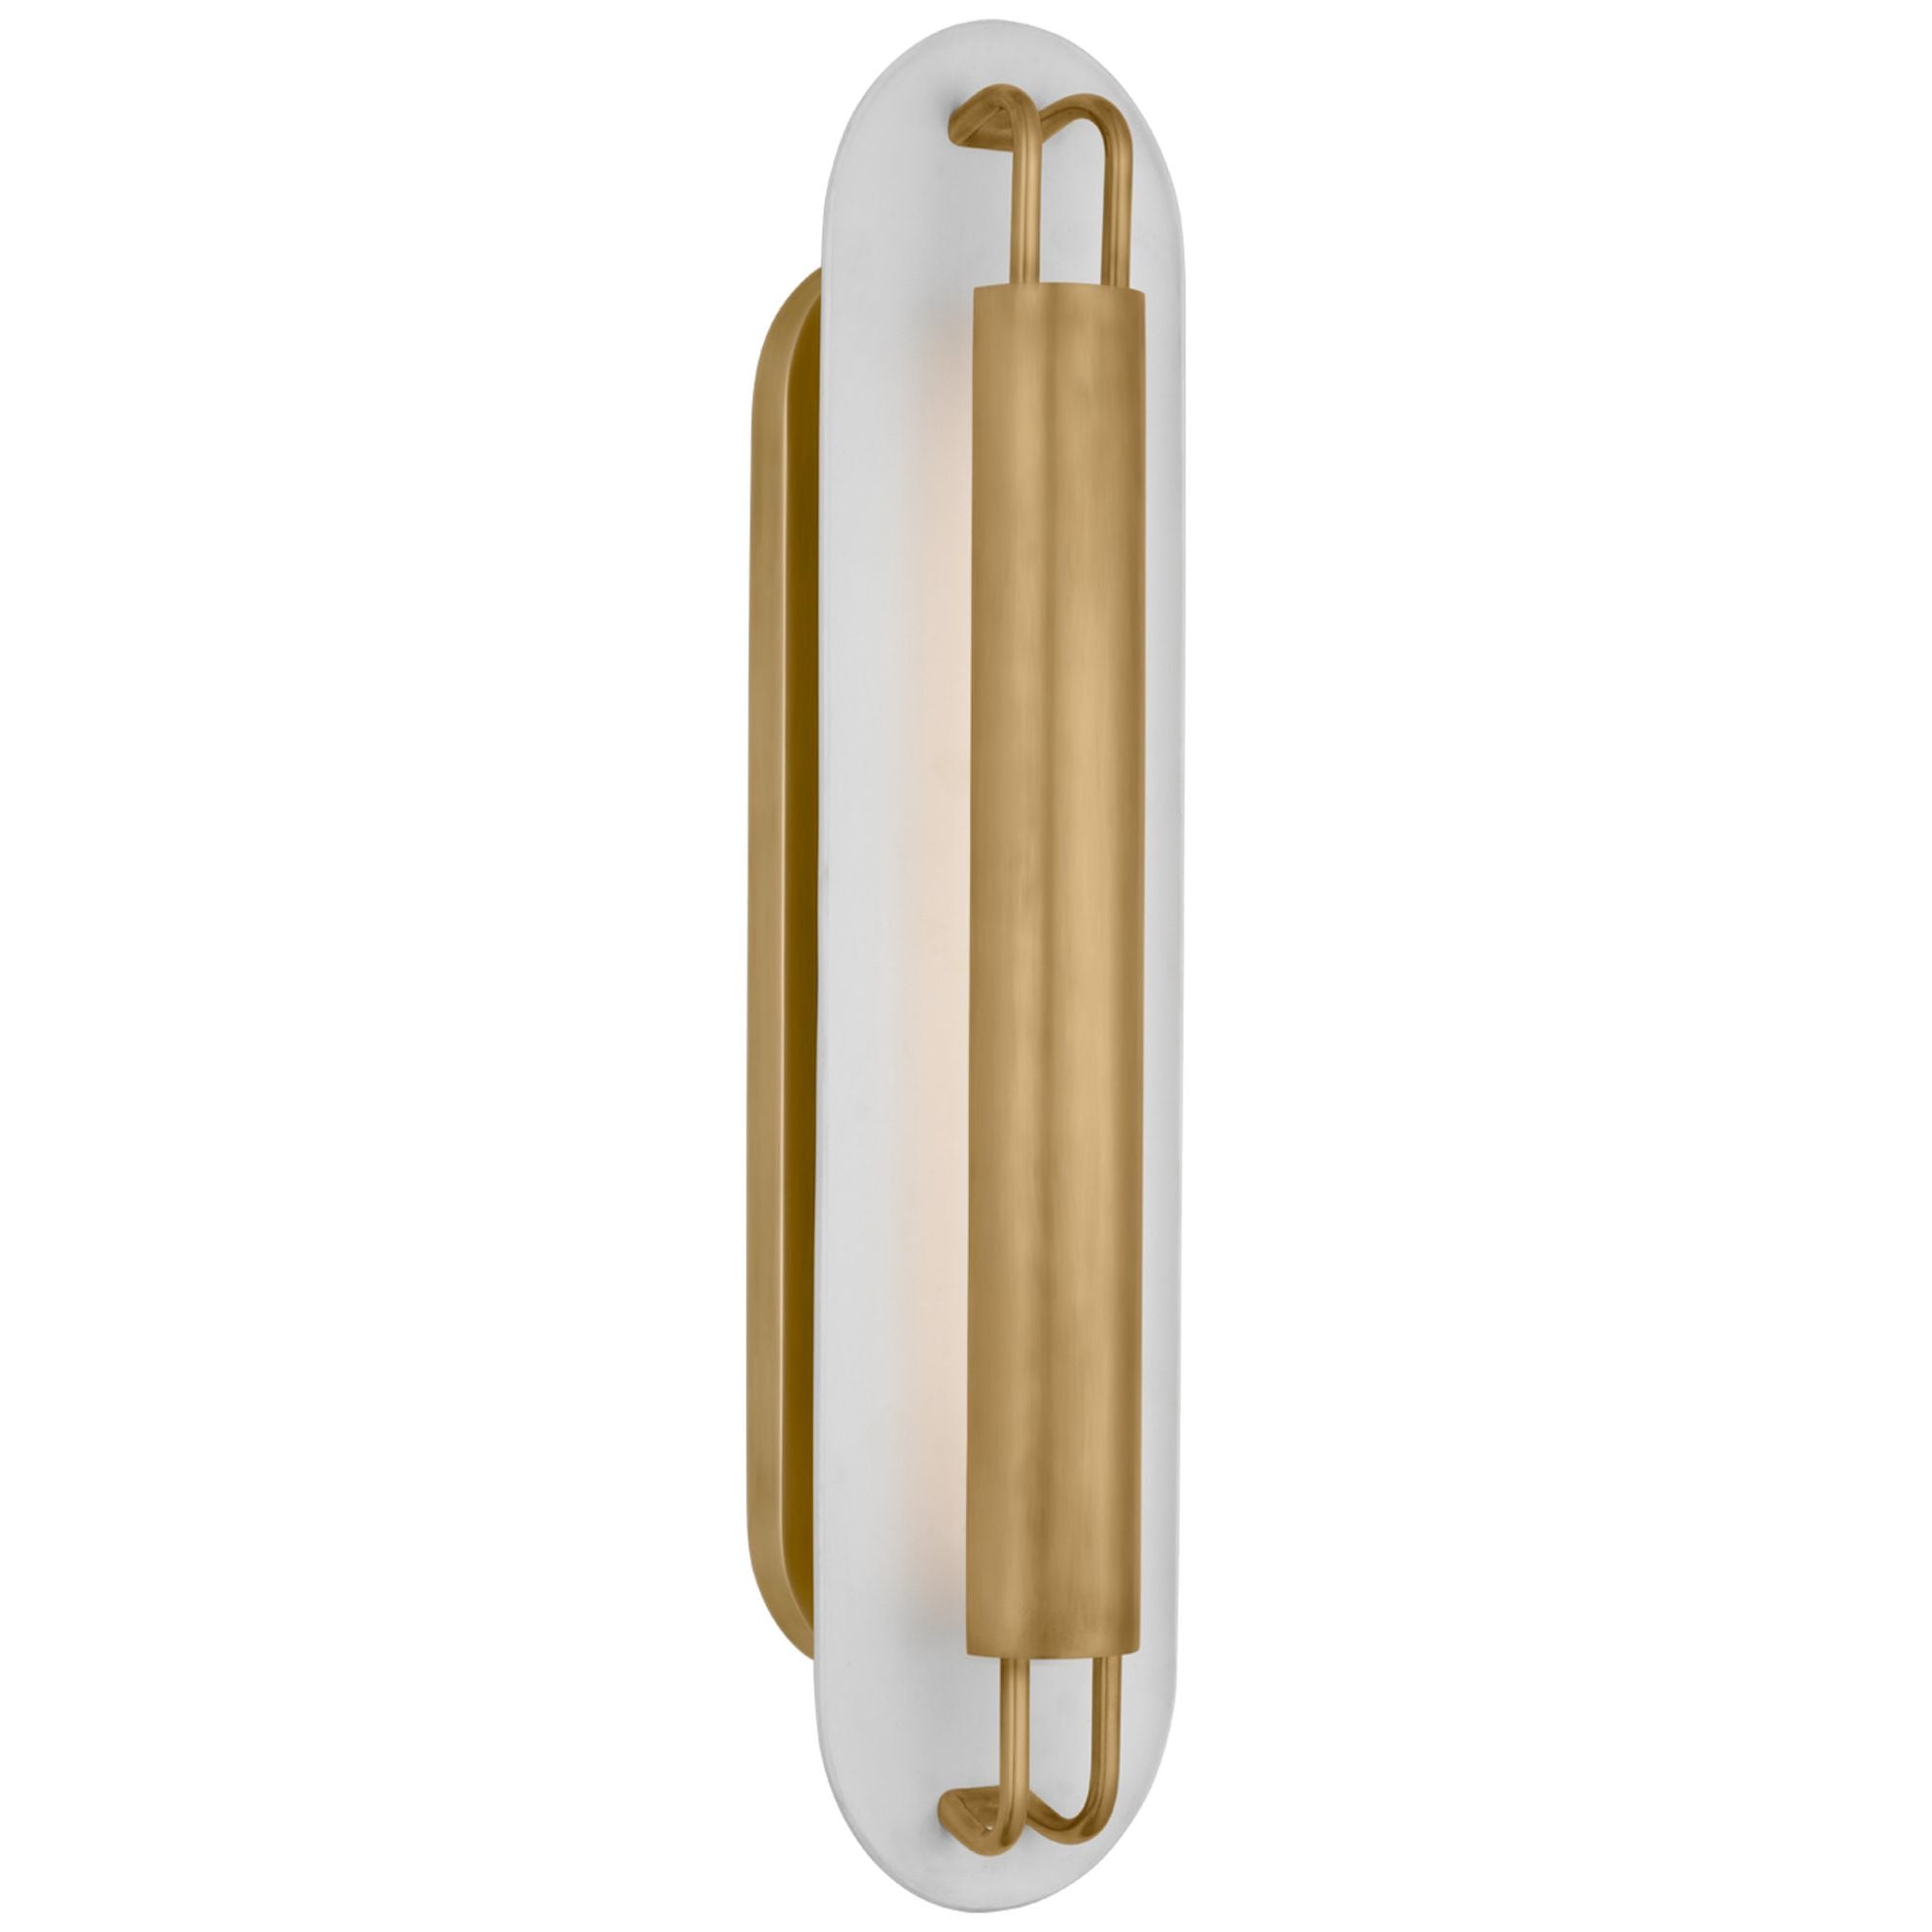 Kelly Wearstler Teline 24" Oval Sconce in Antique-Burnished Brass and Matte White